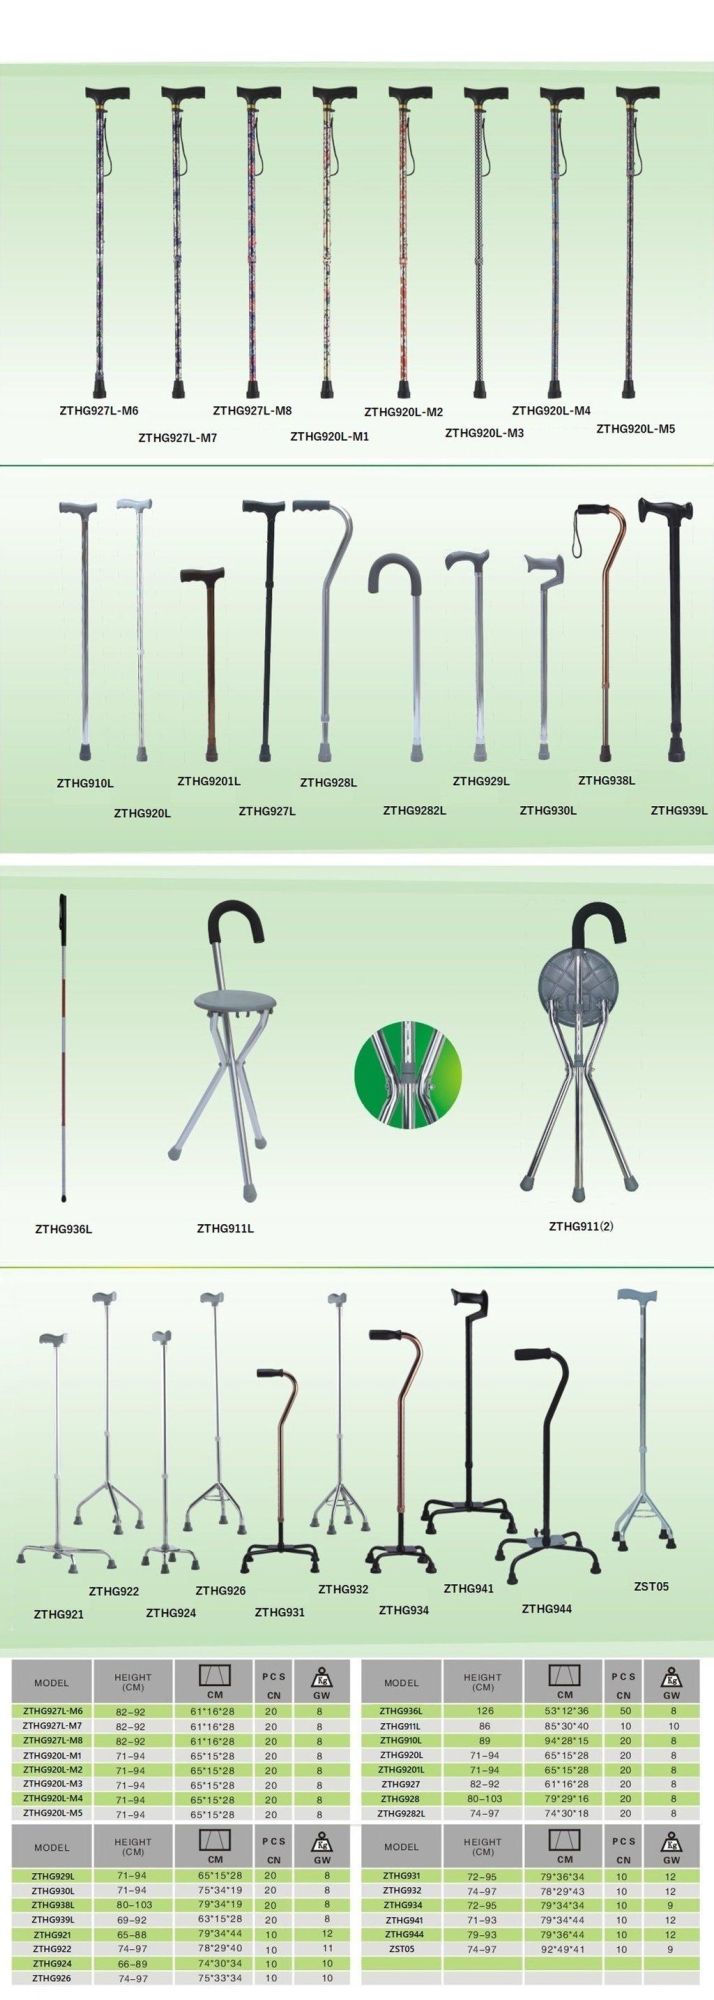 Four Legs Offset Handle Quad Crutch Colorful Lightweight Adjustable Height Strong Safety Walking Aids for Disabled/Elderly People Outdoor Aluminum Product